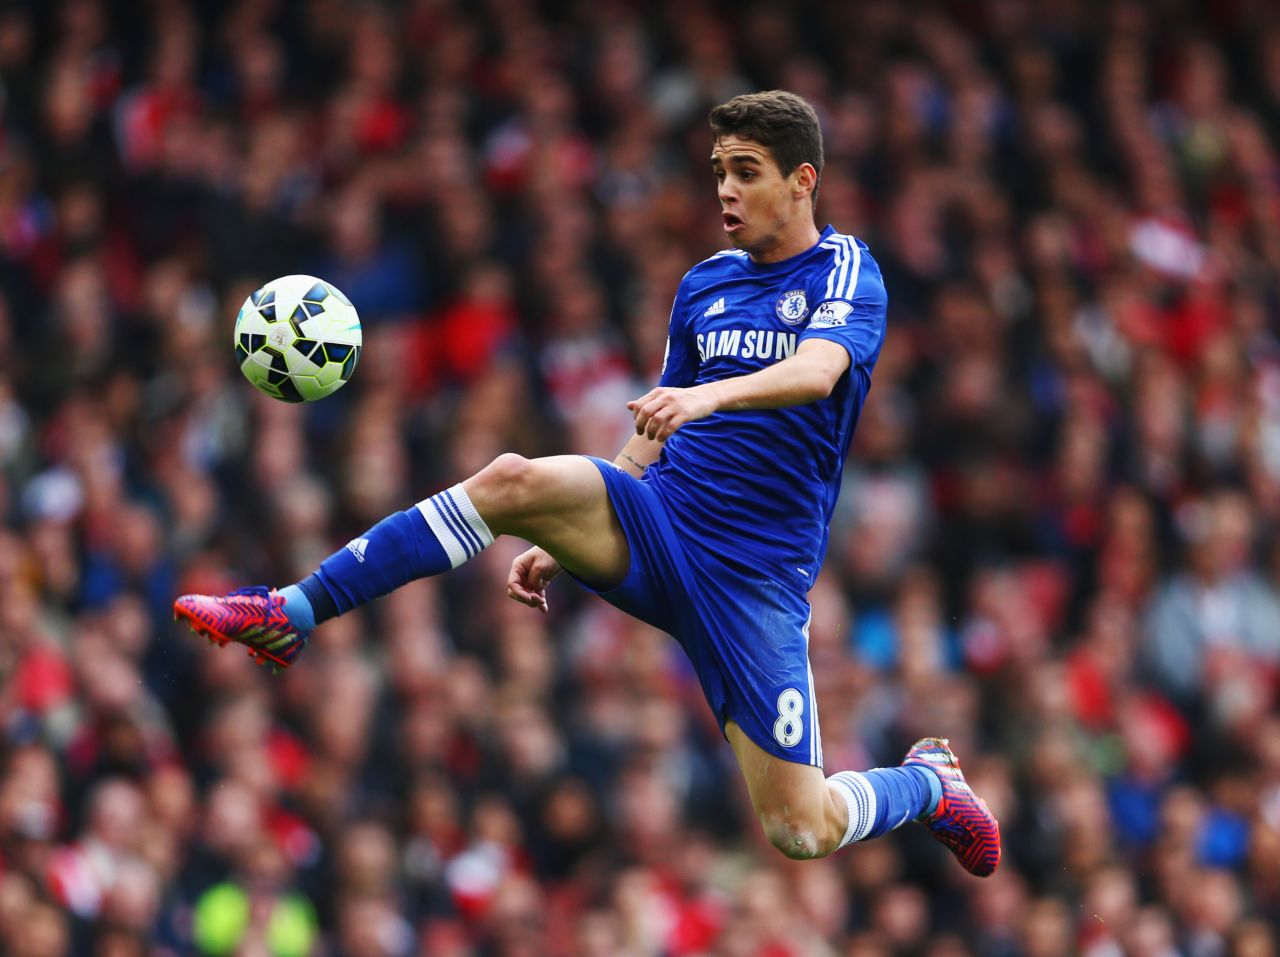 Oscar signed for Chelsea in 2012, scoring 38 goals in 203 appearances. At Shanghai SIPG, he'll be earning a reported $491,000 a week. 